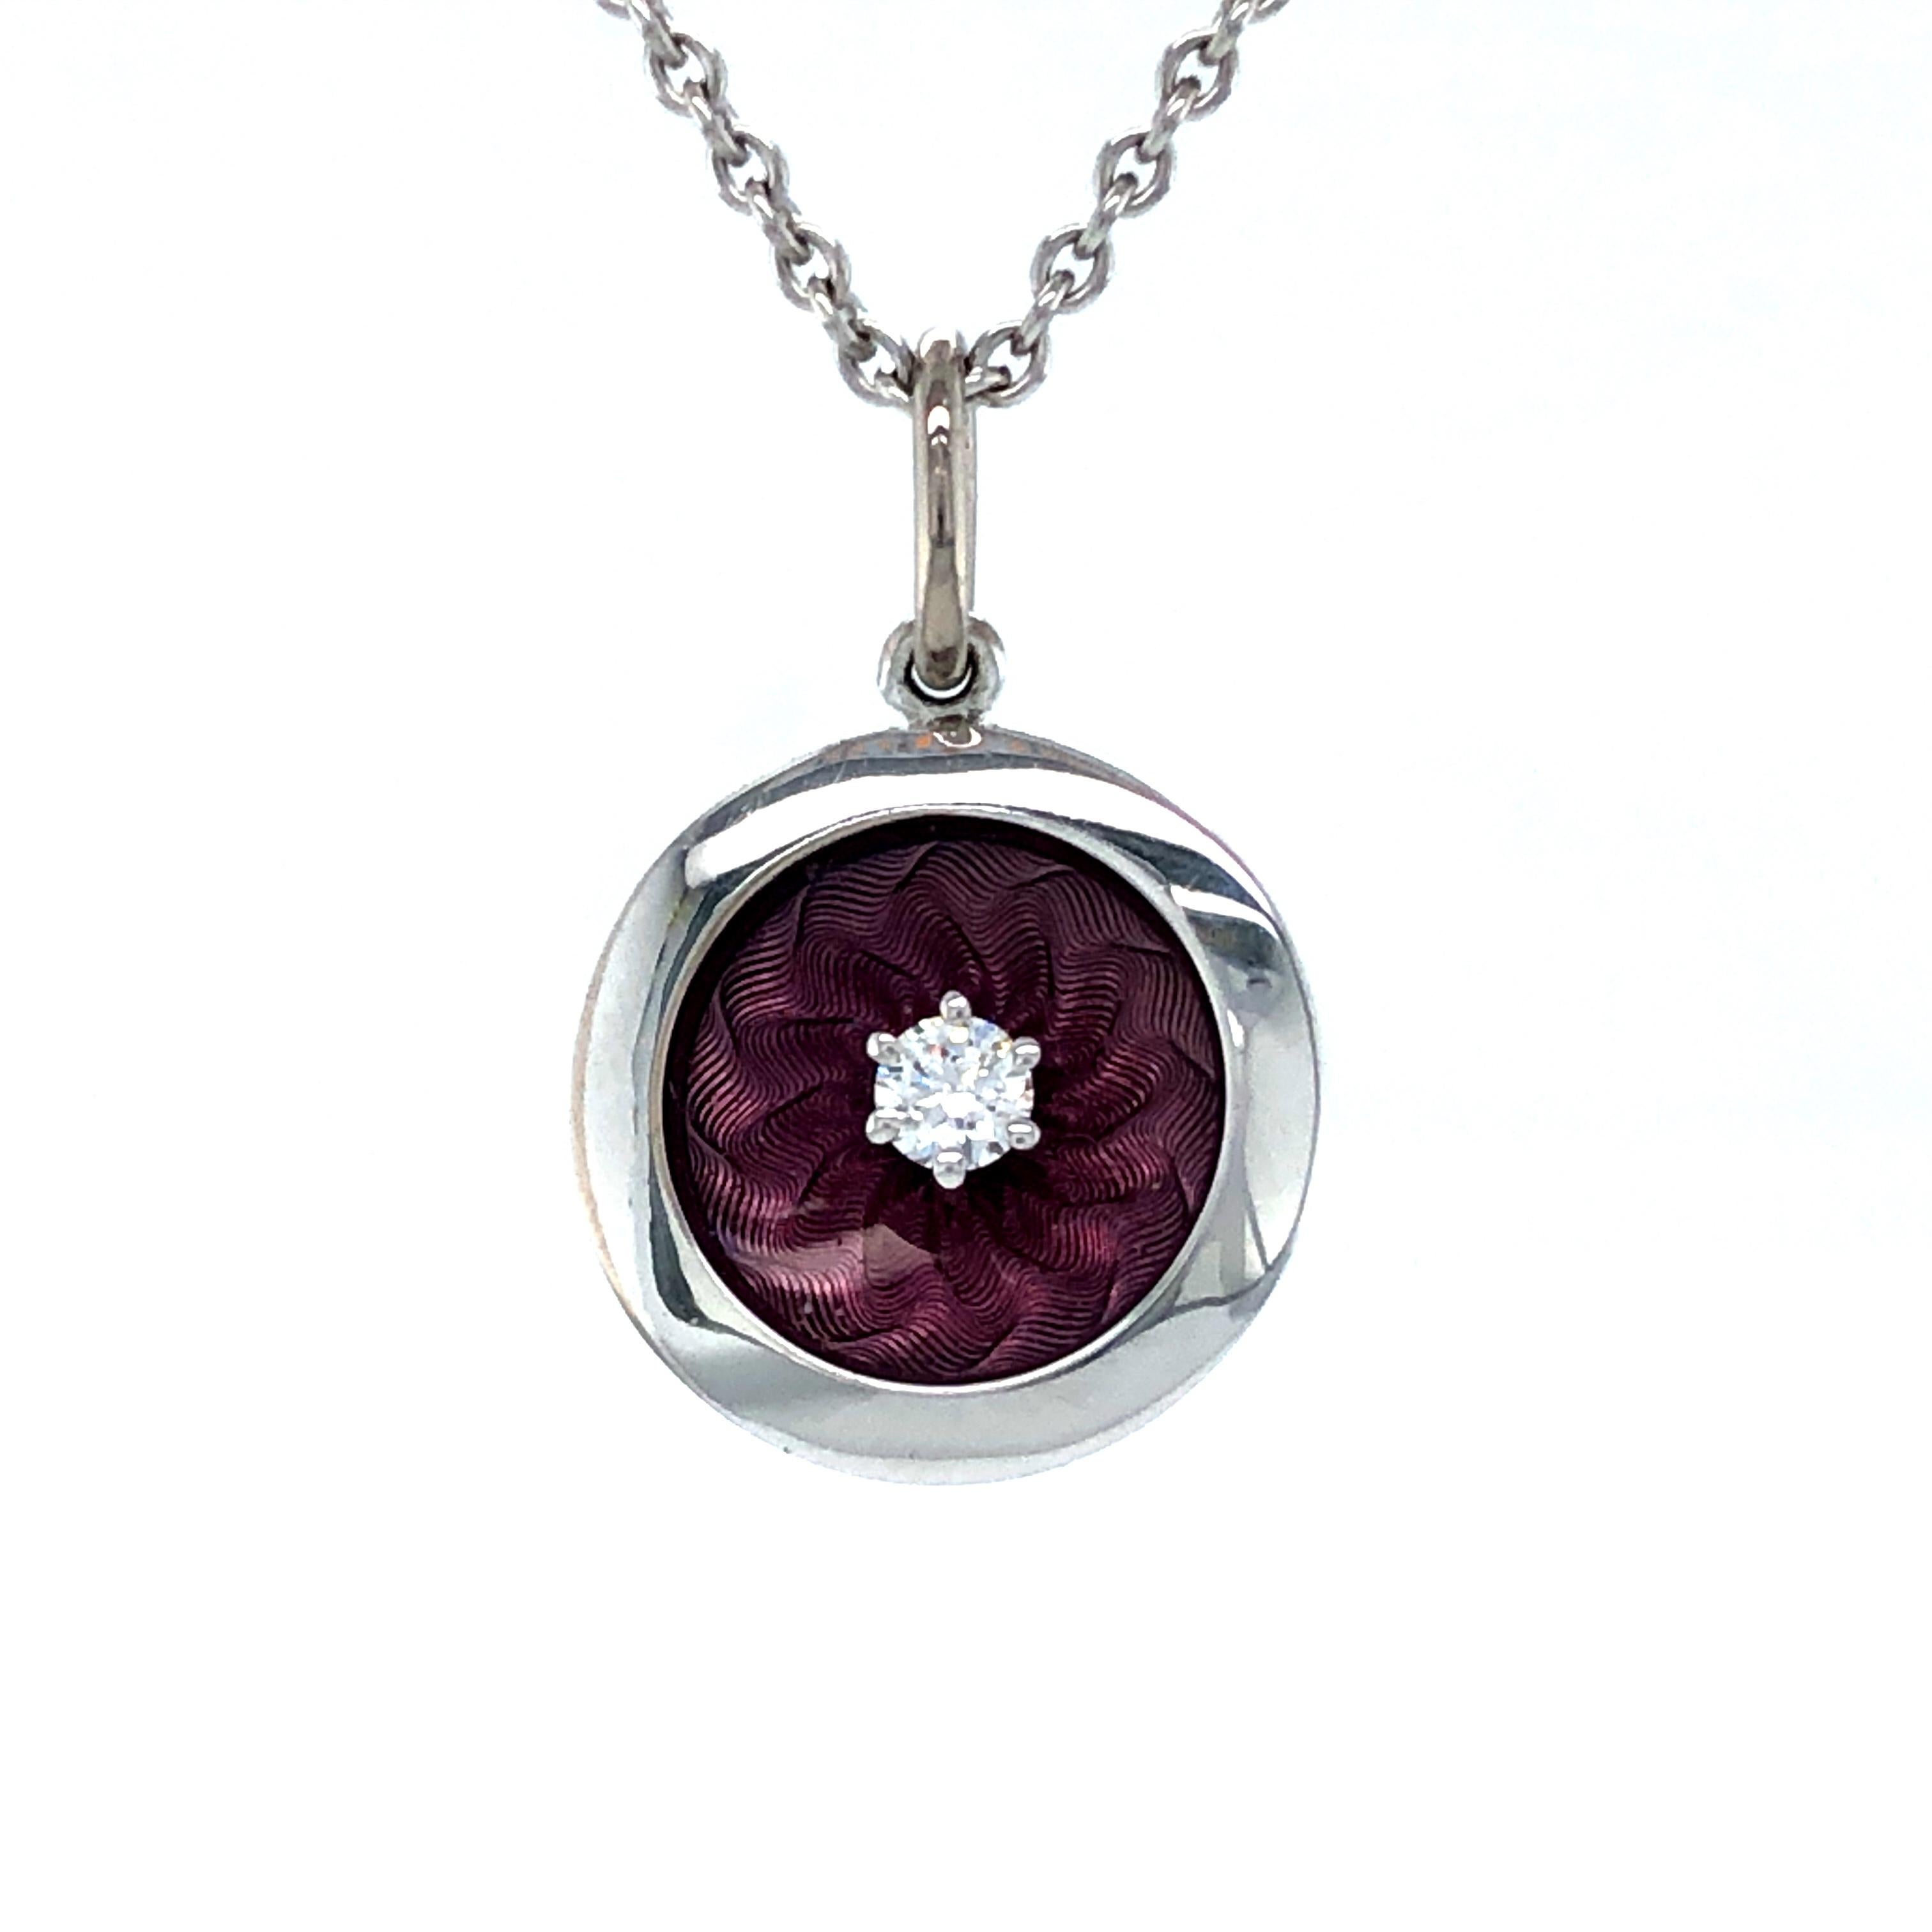 Victor Mayer round pendant necklace 18k white gold, Trance Collection, mauve guilloche enamel, 1 diamond, total 0.07 ct, G VS, Diameter app. 12.4 mm

About the creator Victor Mayer
Victor Mayer is internationally renowned for elegant timeless